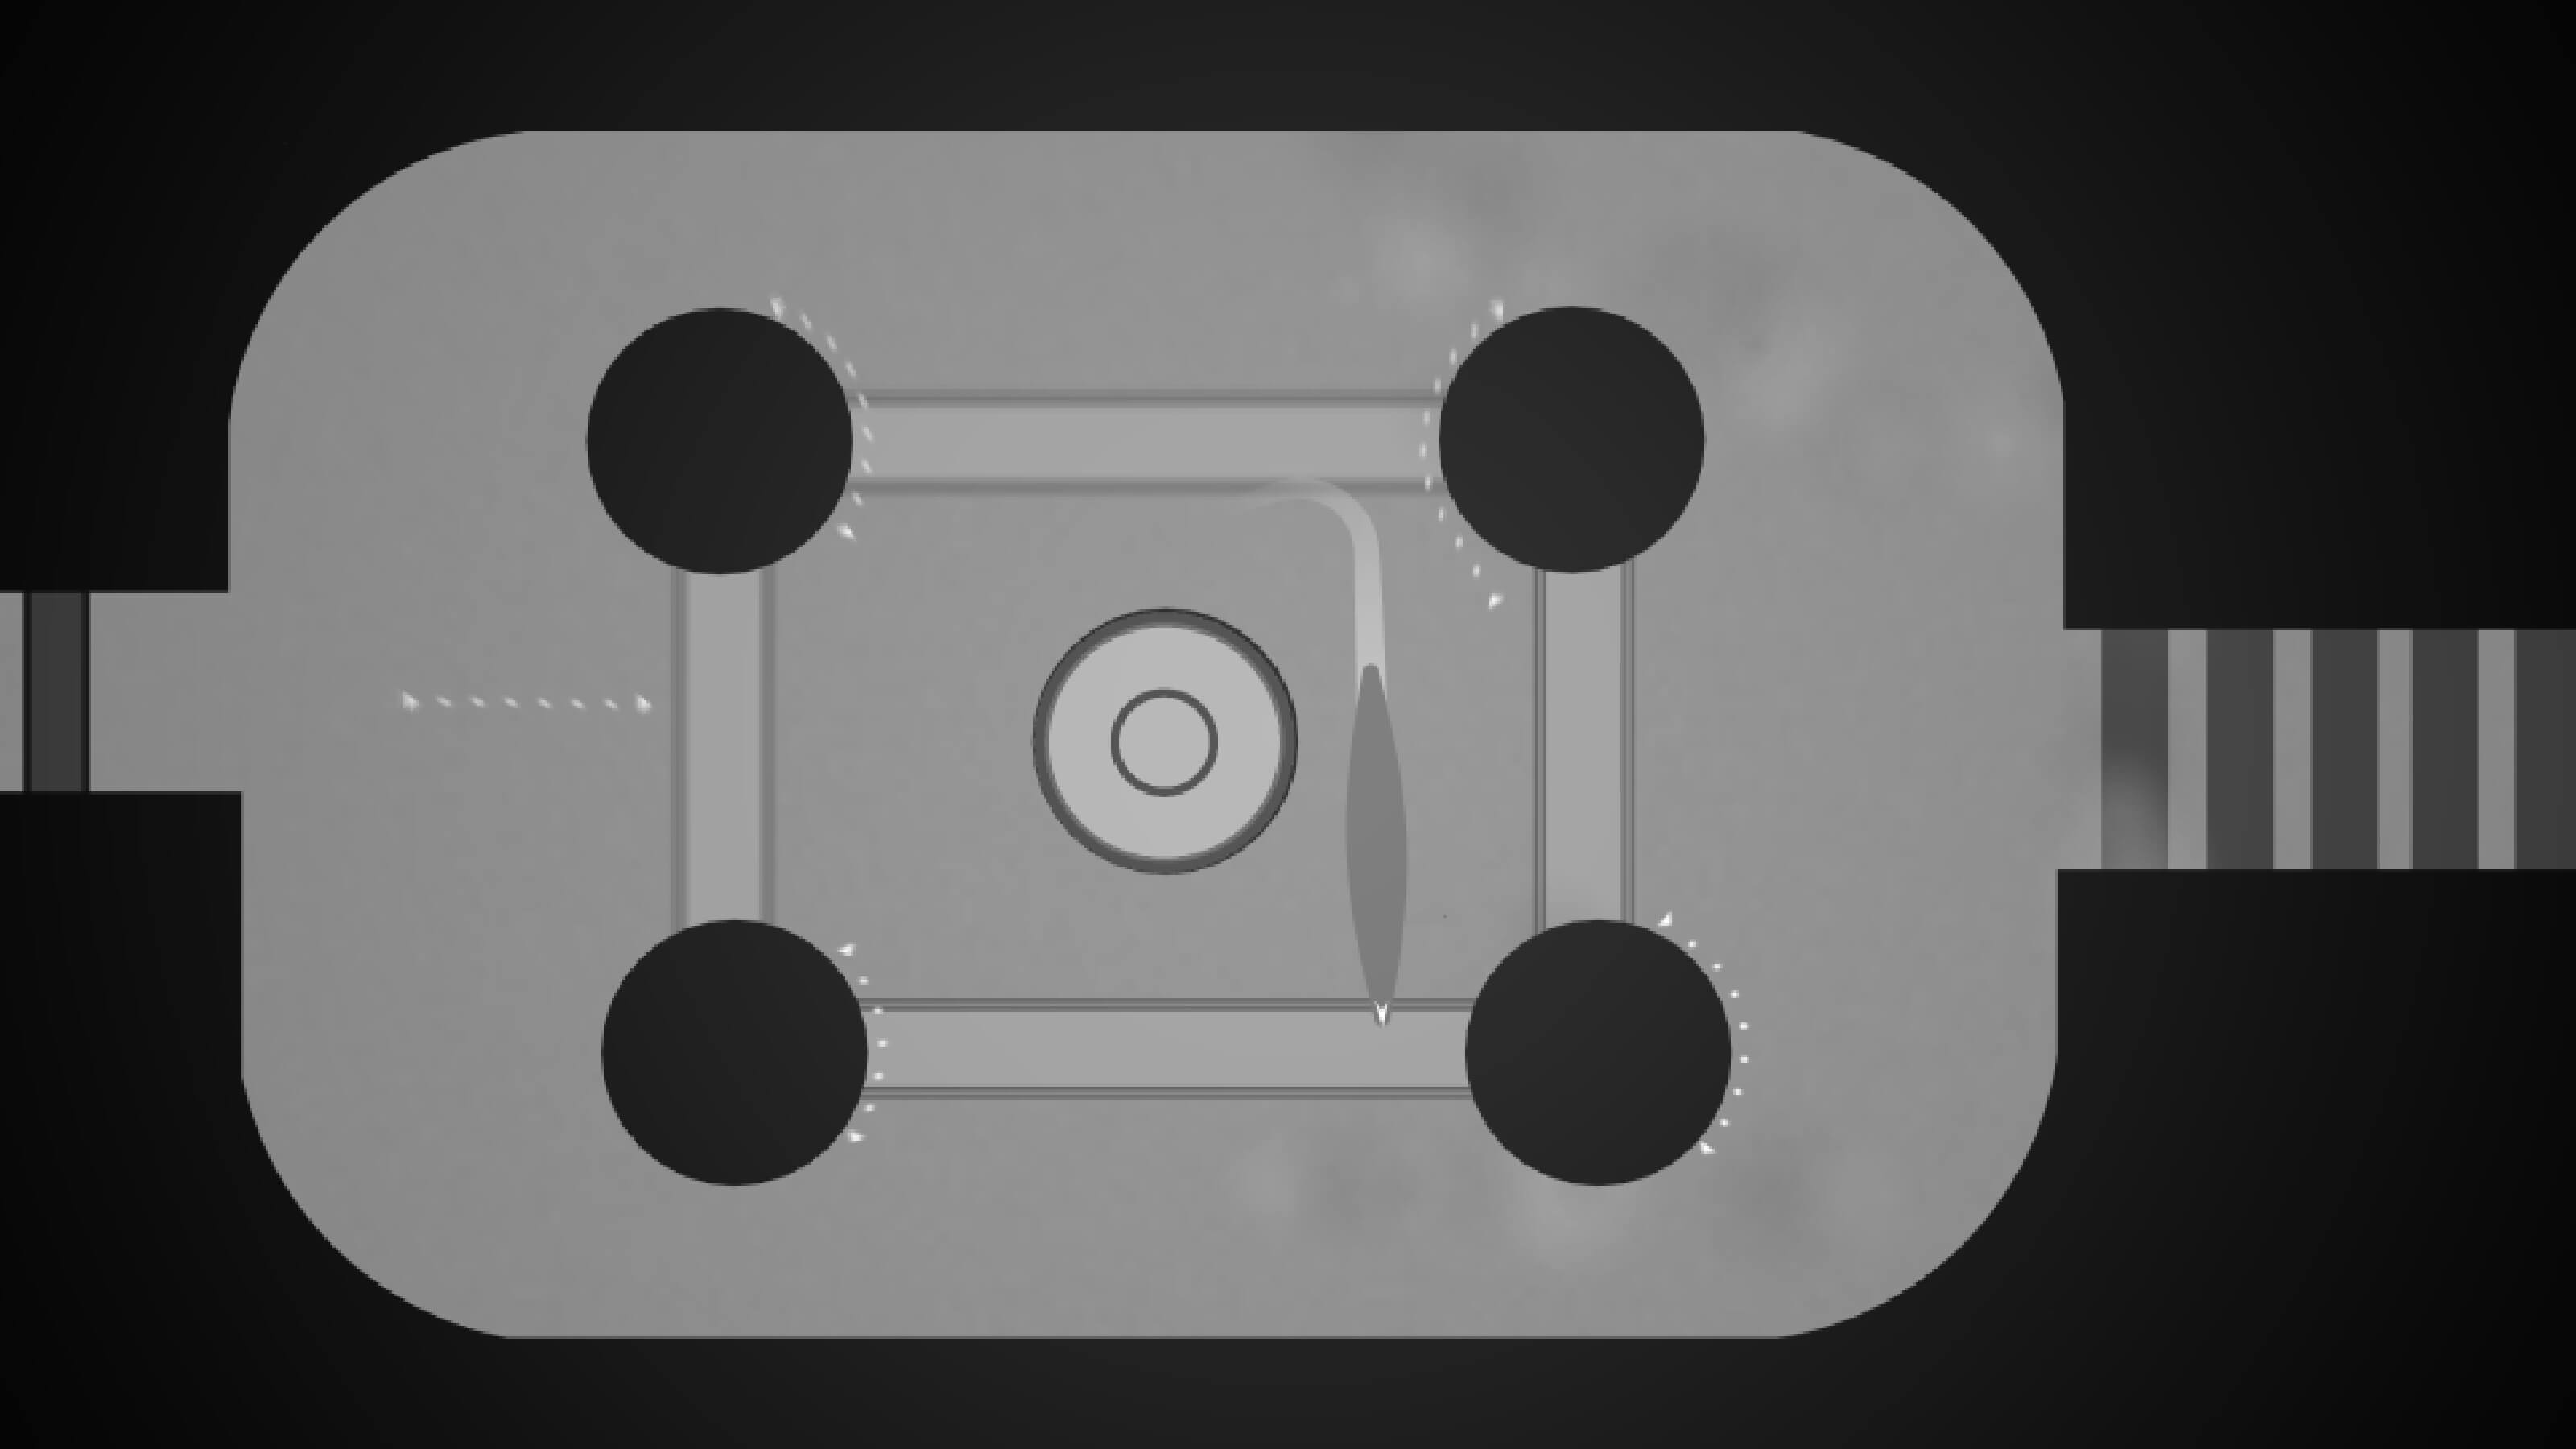 Rendered in grayscale, a slug-like creature is seen from top down in an enclosed, rectangular area with four black circles.